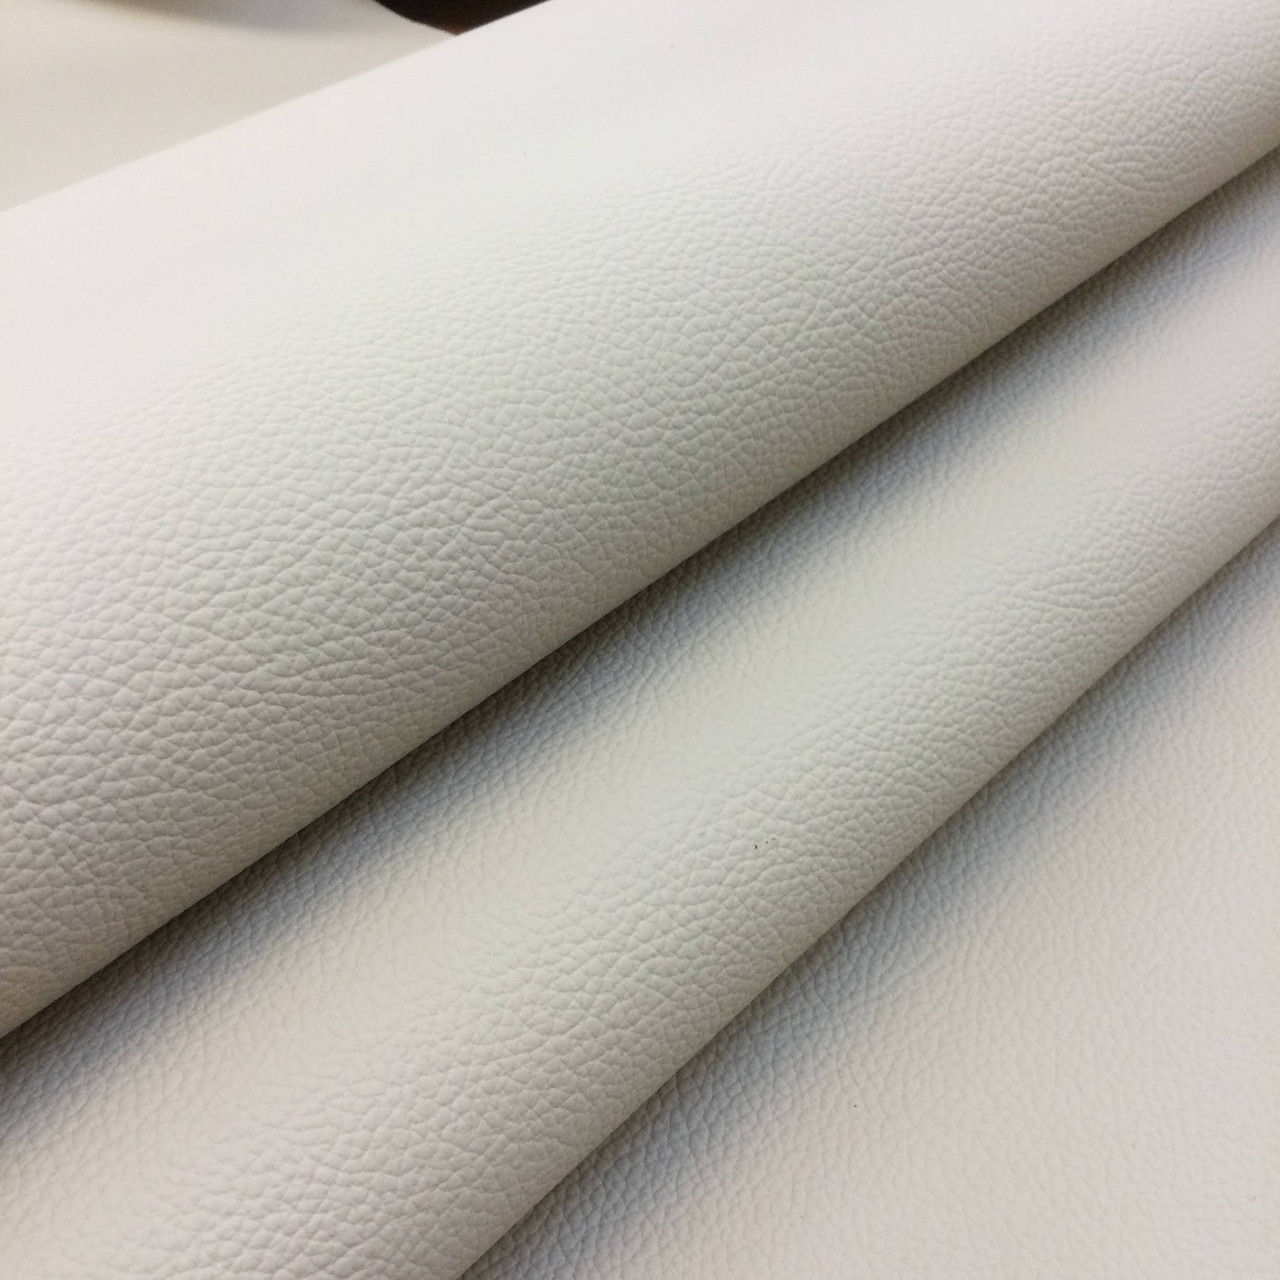 Beige Faux Leather Vinyl Automotive Headliner Fabric | Foam-Backed |  Mercedes | 1/4 Thick | 54 Wide | Bag Stabilizer / Sew Foam | By the Yard